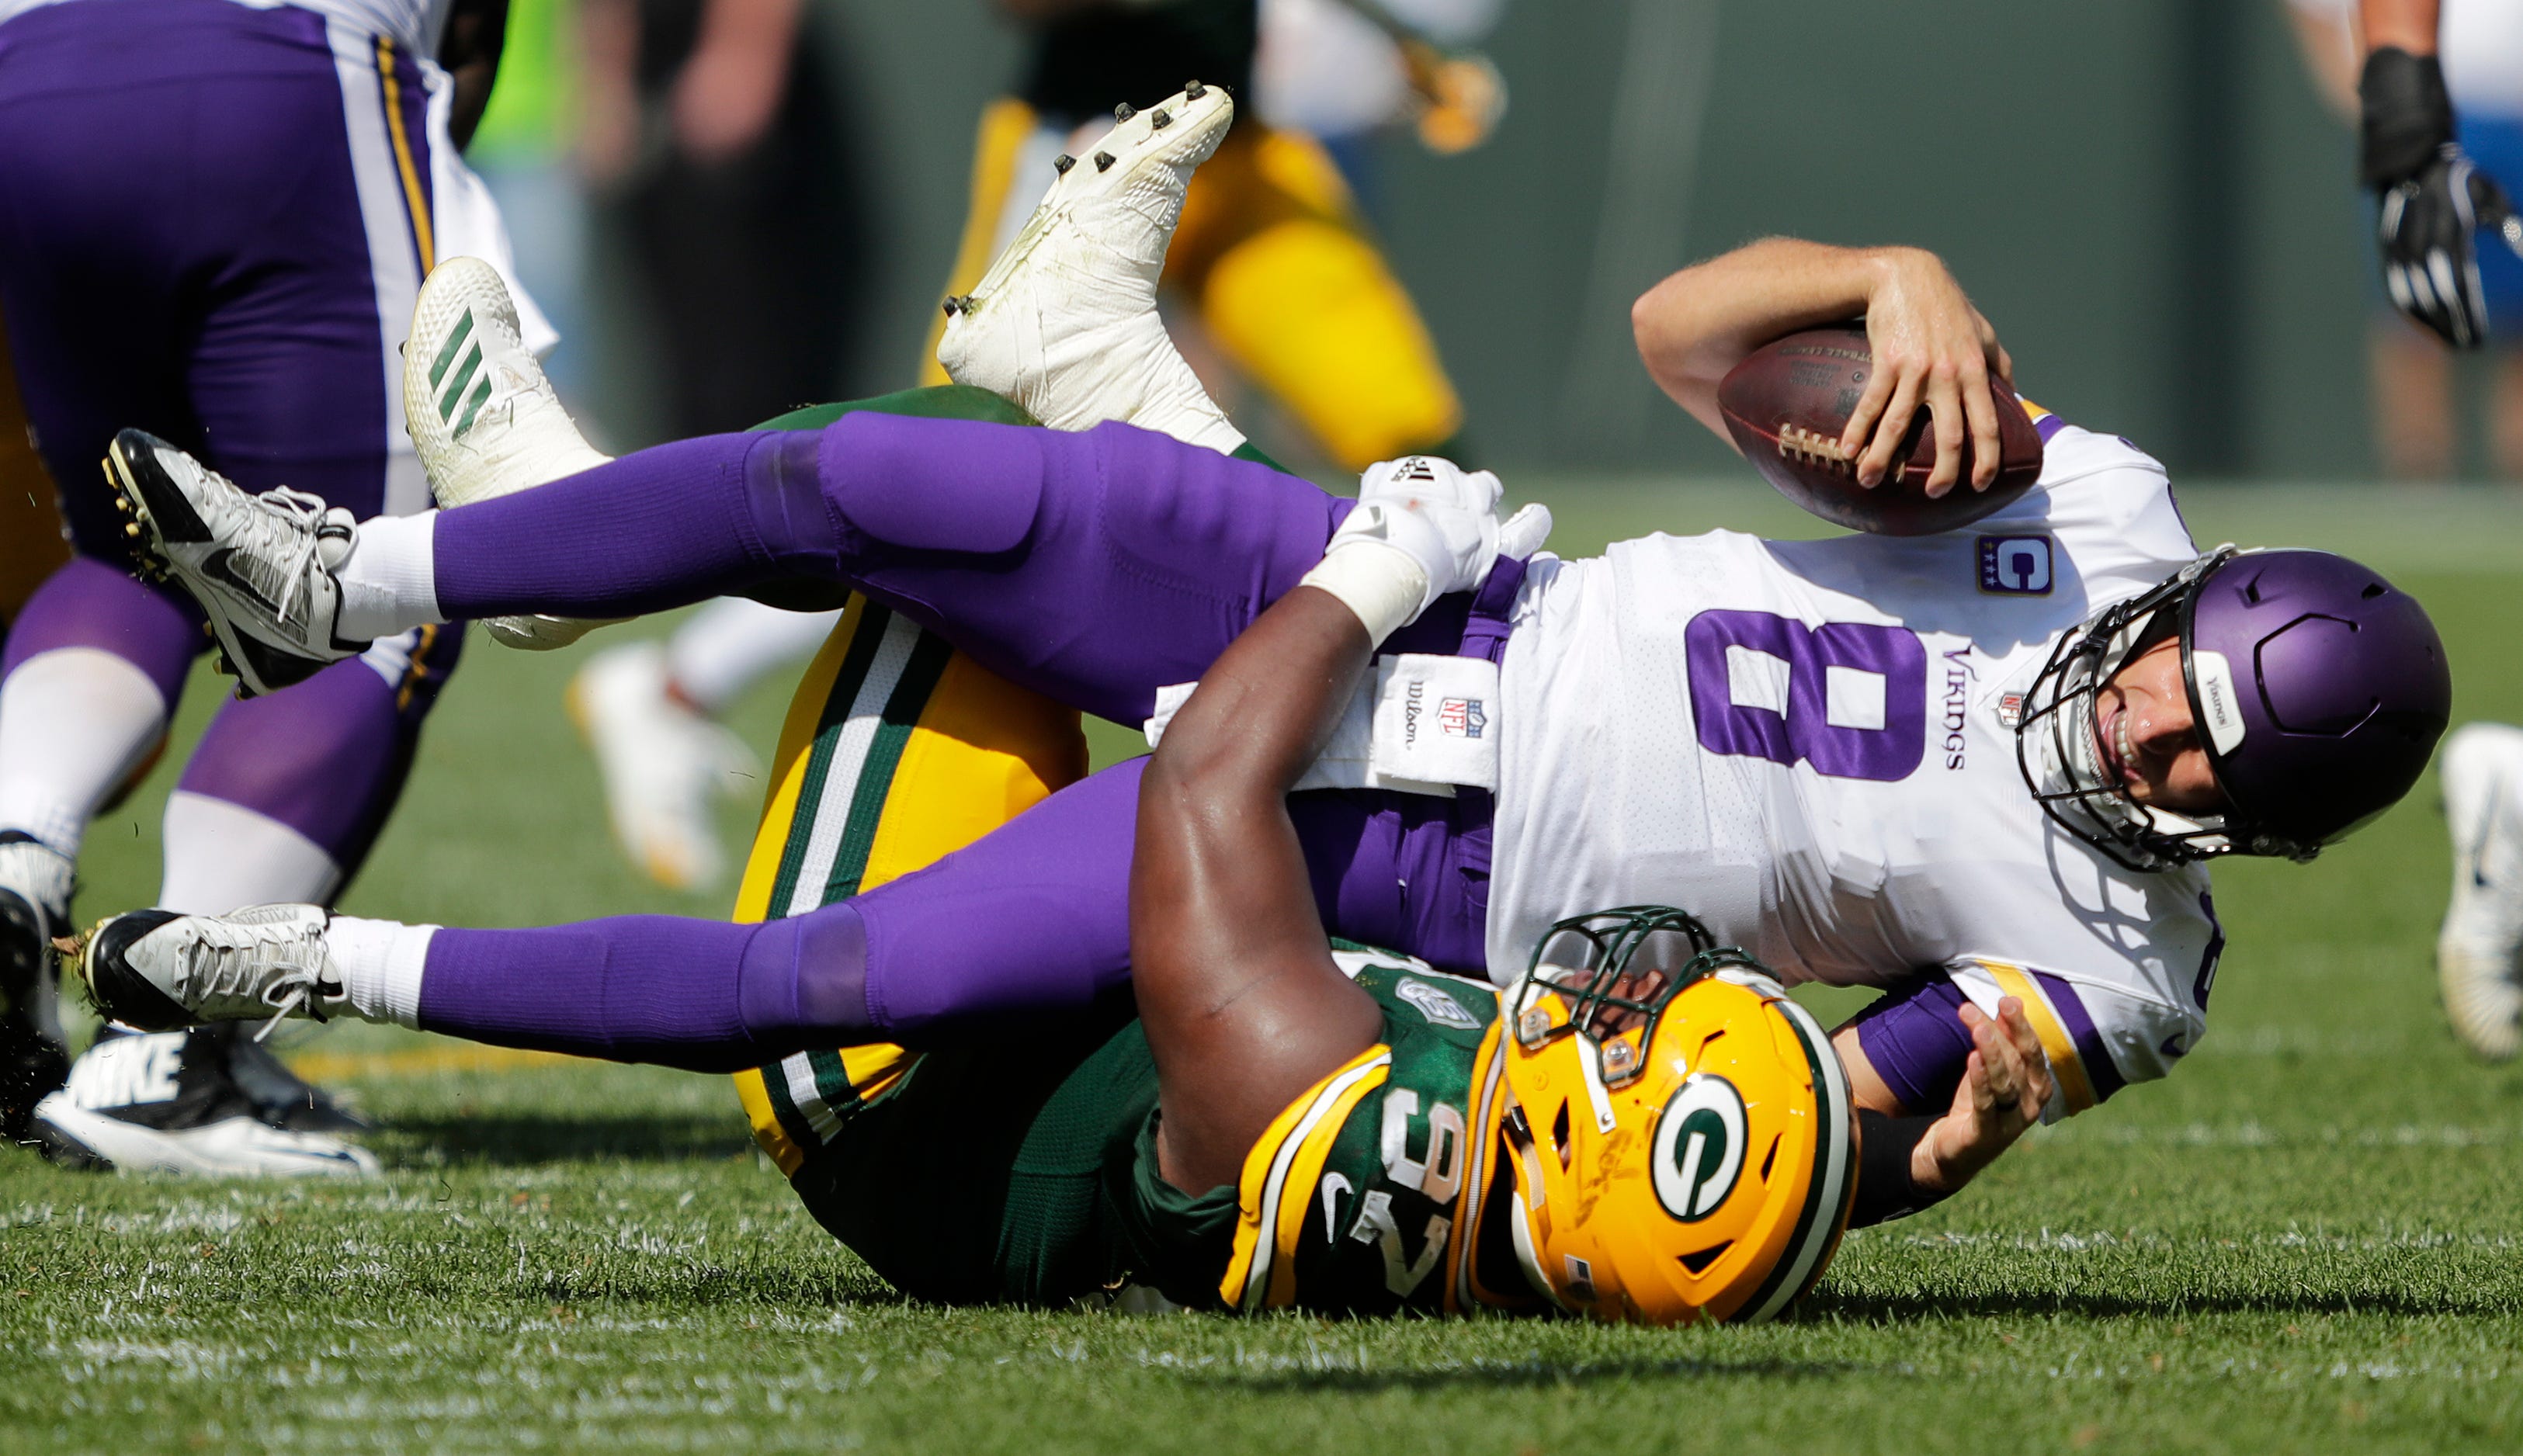 Green Bay Packers nose tackle Kenny Clark (97) sacks Minnesota Vikings quarterback Kirk Cousins (8) in the third quarter during their football game Sunday, Sept. 16, 2018, at Lambeau Field in Green Bay, Wis.